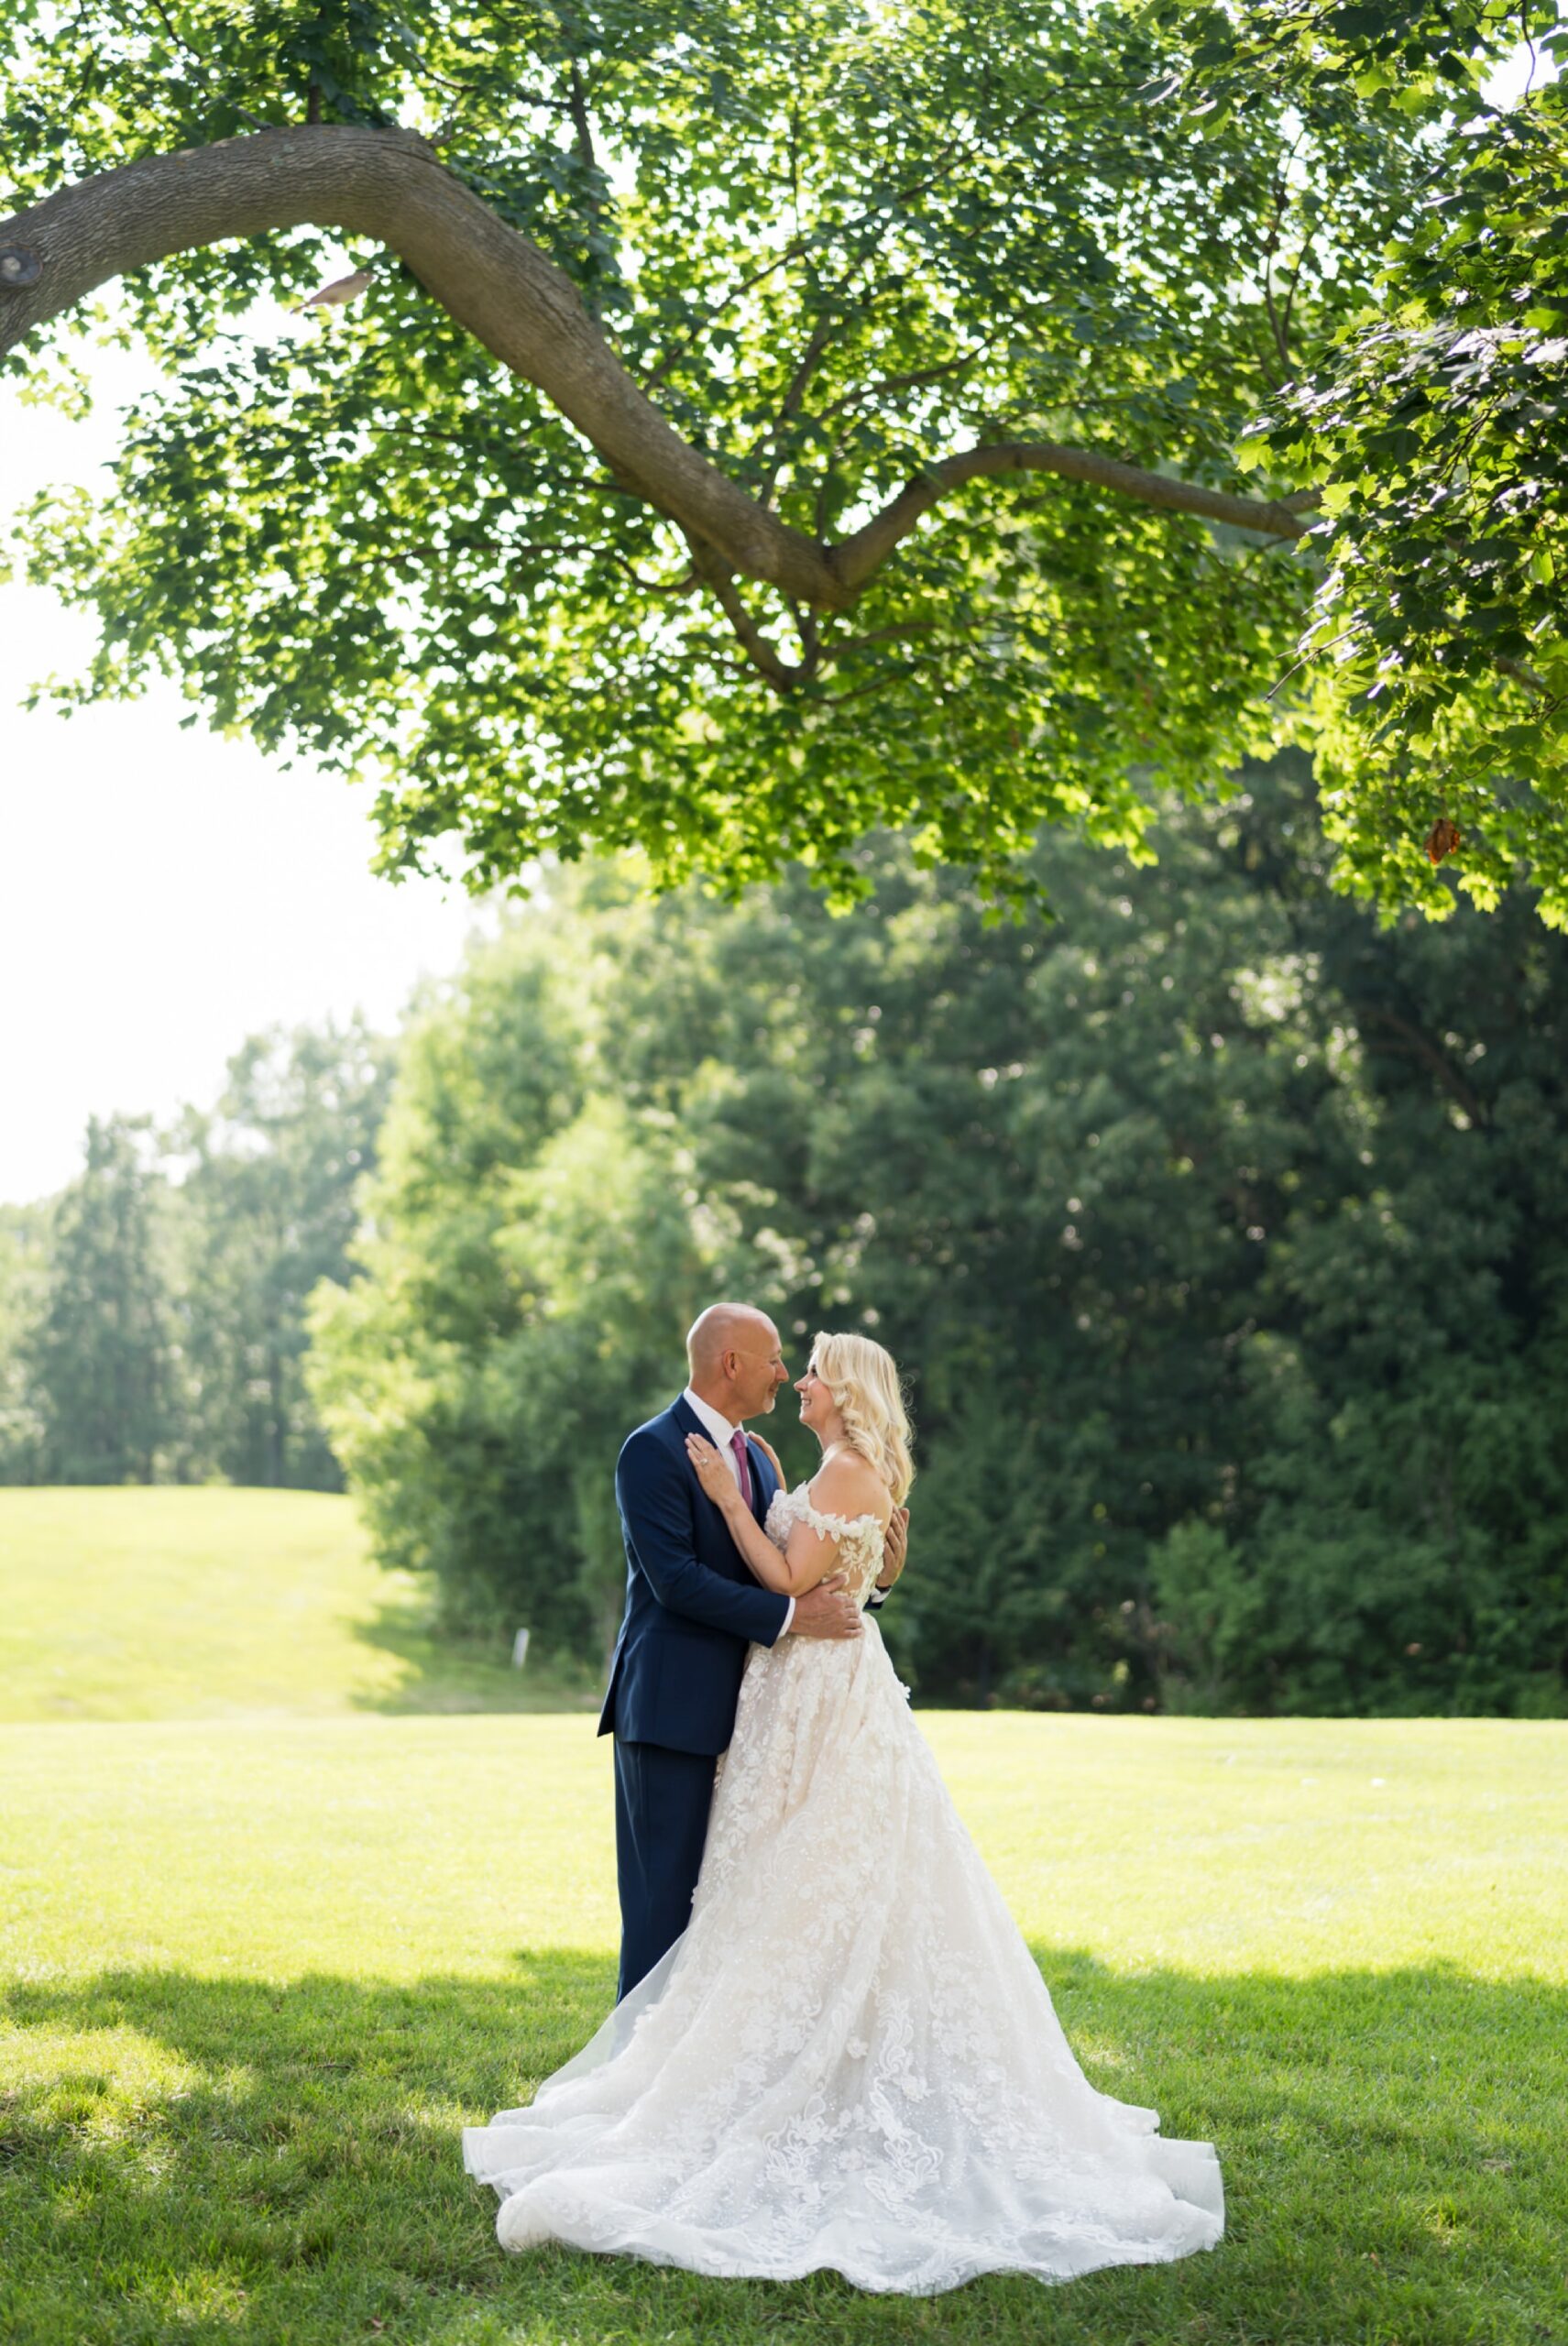 Standing under a tree, a bride and groom embrace on their wedding day at Meadow Brook Hall.  